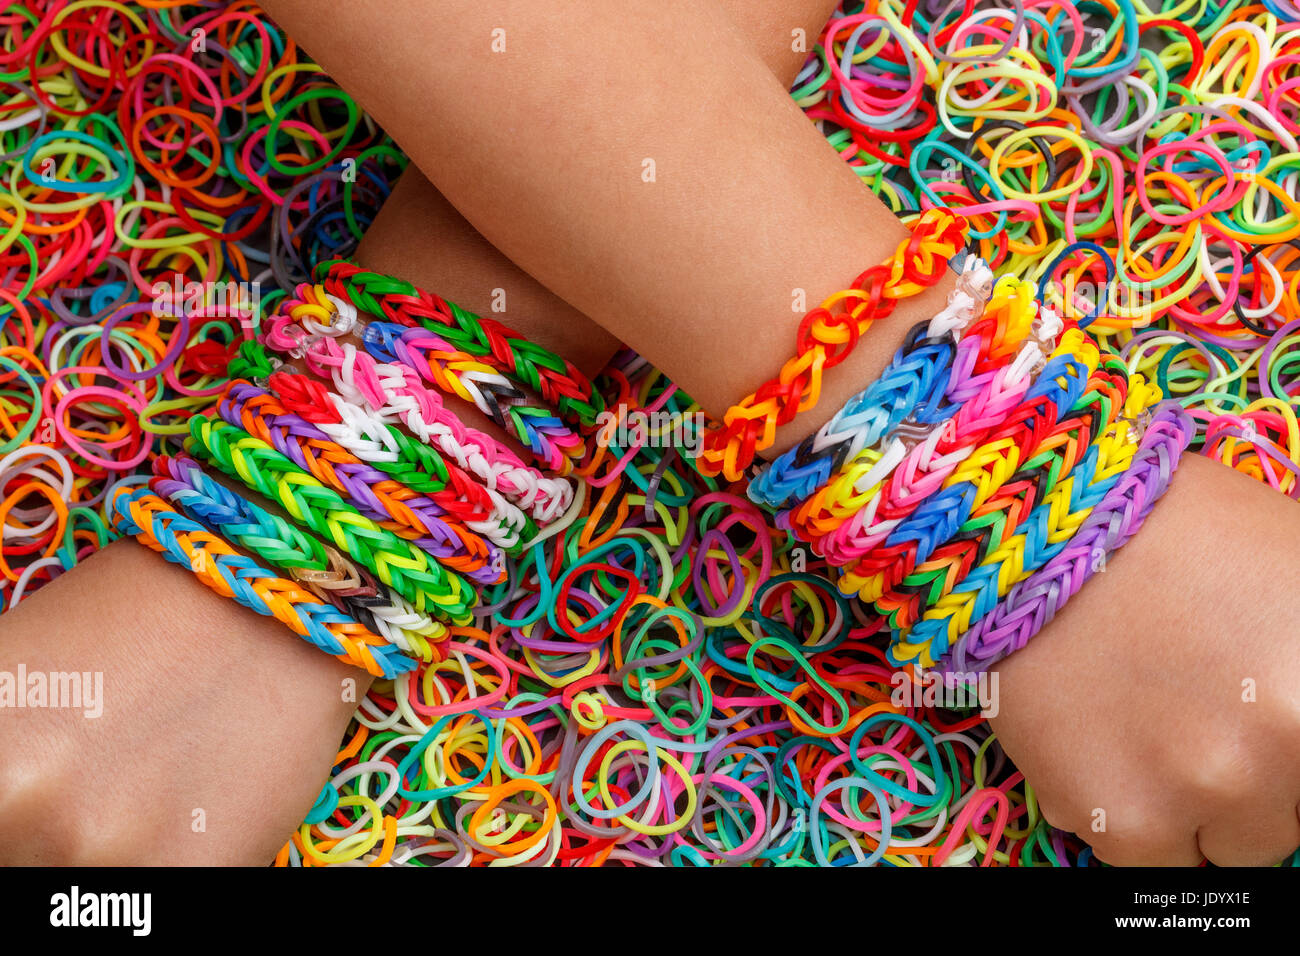 Handmade color rainbow looms on white background Stock Photo